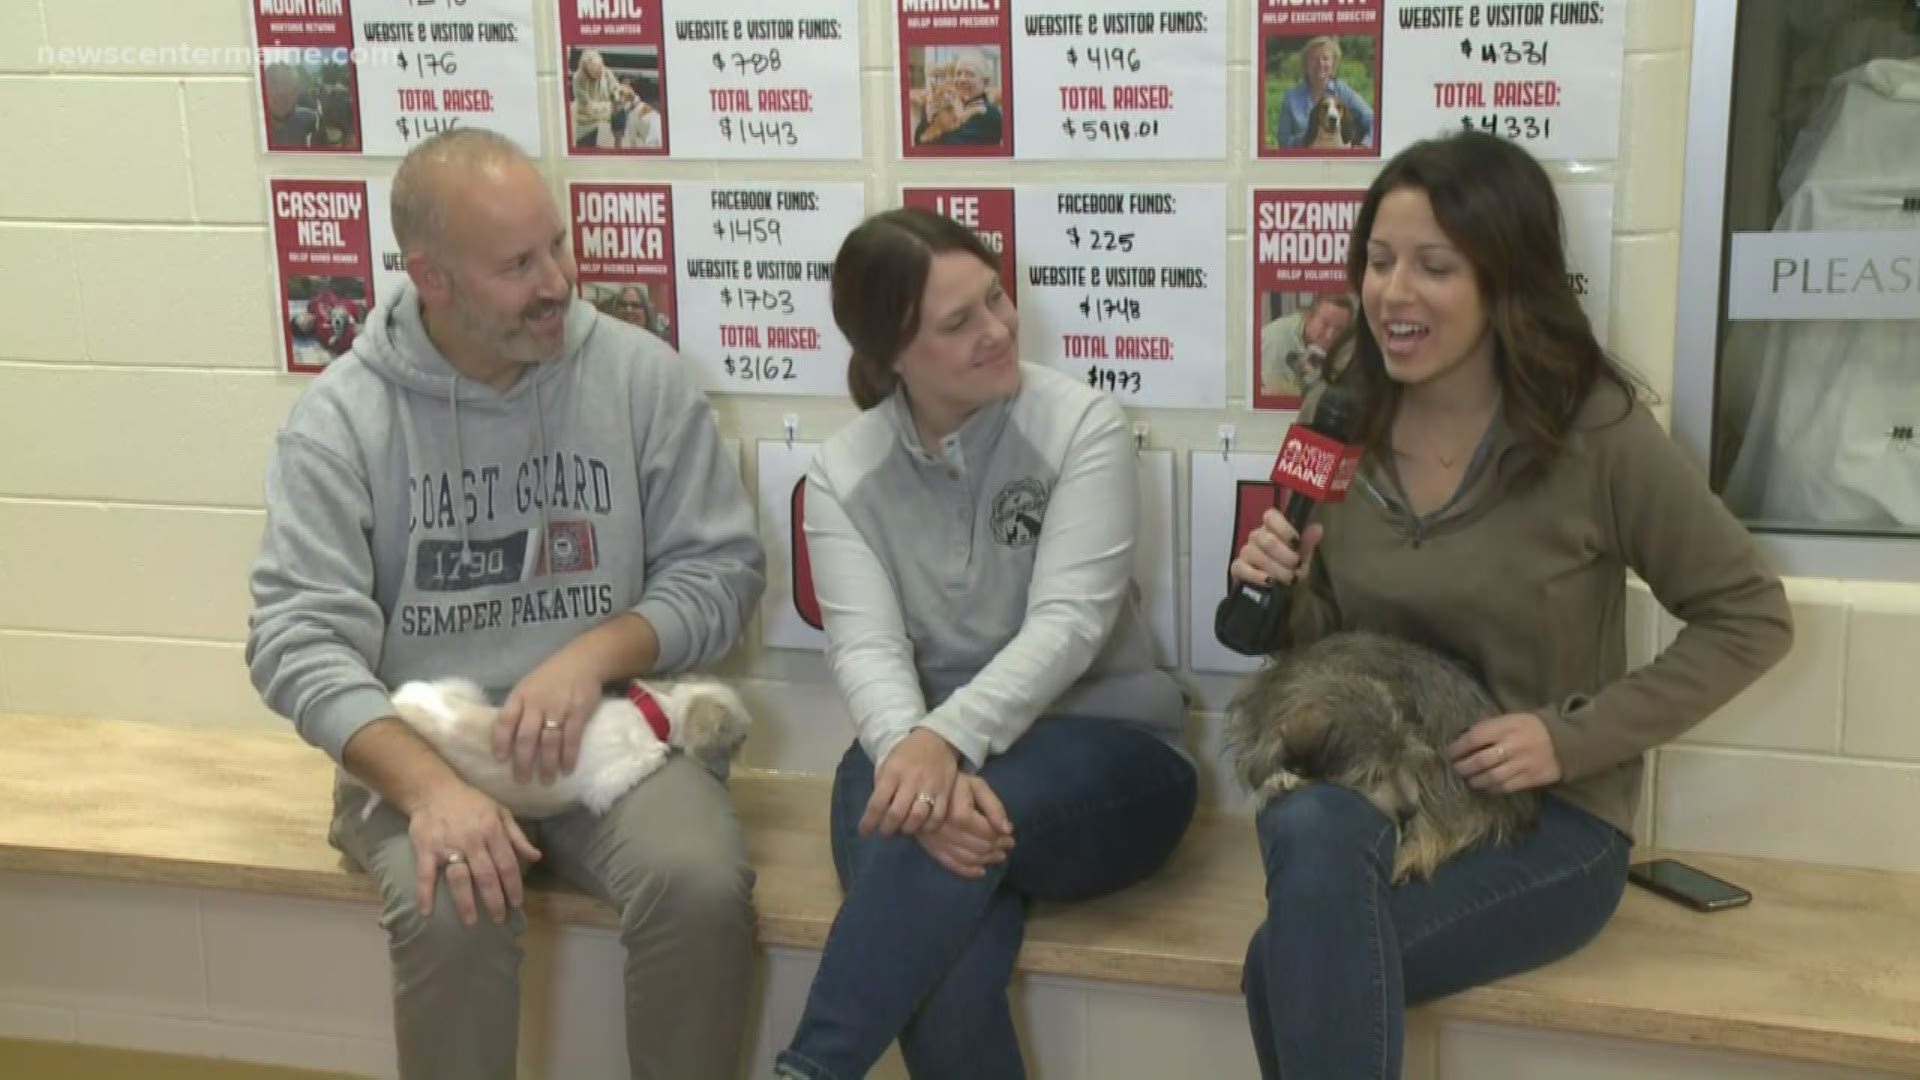 NEWS CENTER Maine's Amanda Hill and Lee Goldberg spent the night at Animal Refuge League for new fundraiser.